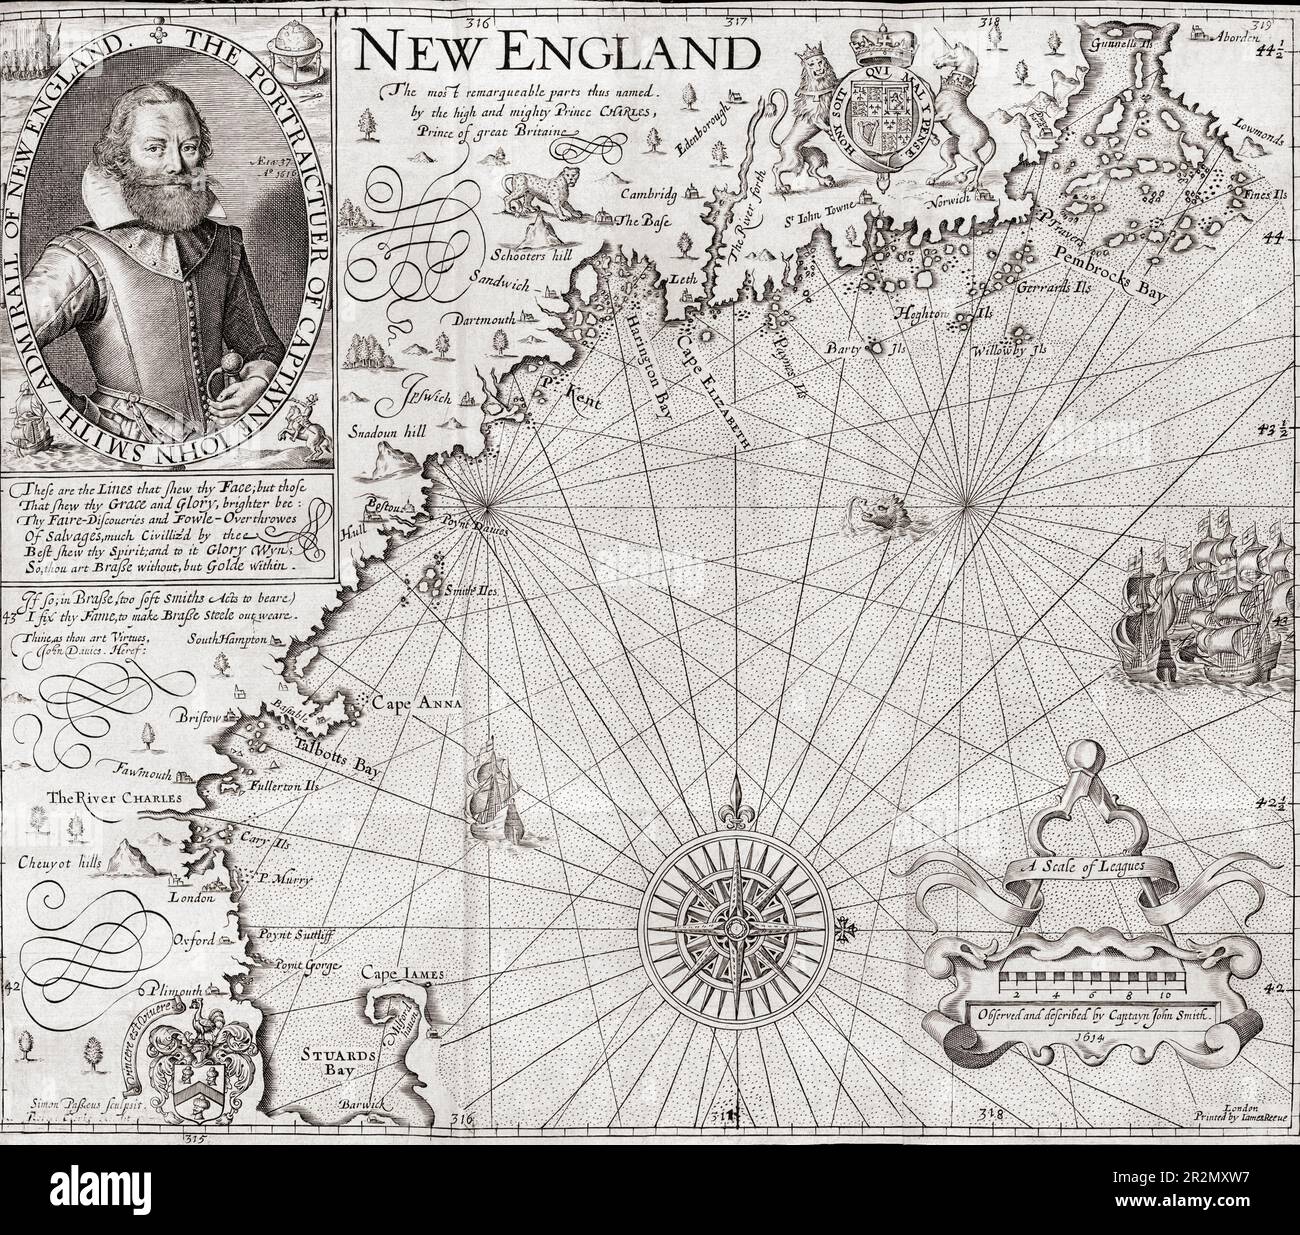 Map of New England including a portrait of John Smith who helped establish Jamestown and later was the third president of the settlement's governing council.  The map was engraved by Simon van de Pass and included in Smith's book The generall historie of Virginia, New-England, and the Summer Isles, 1629 edition. Stock Photo